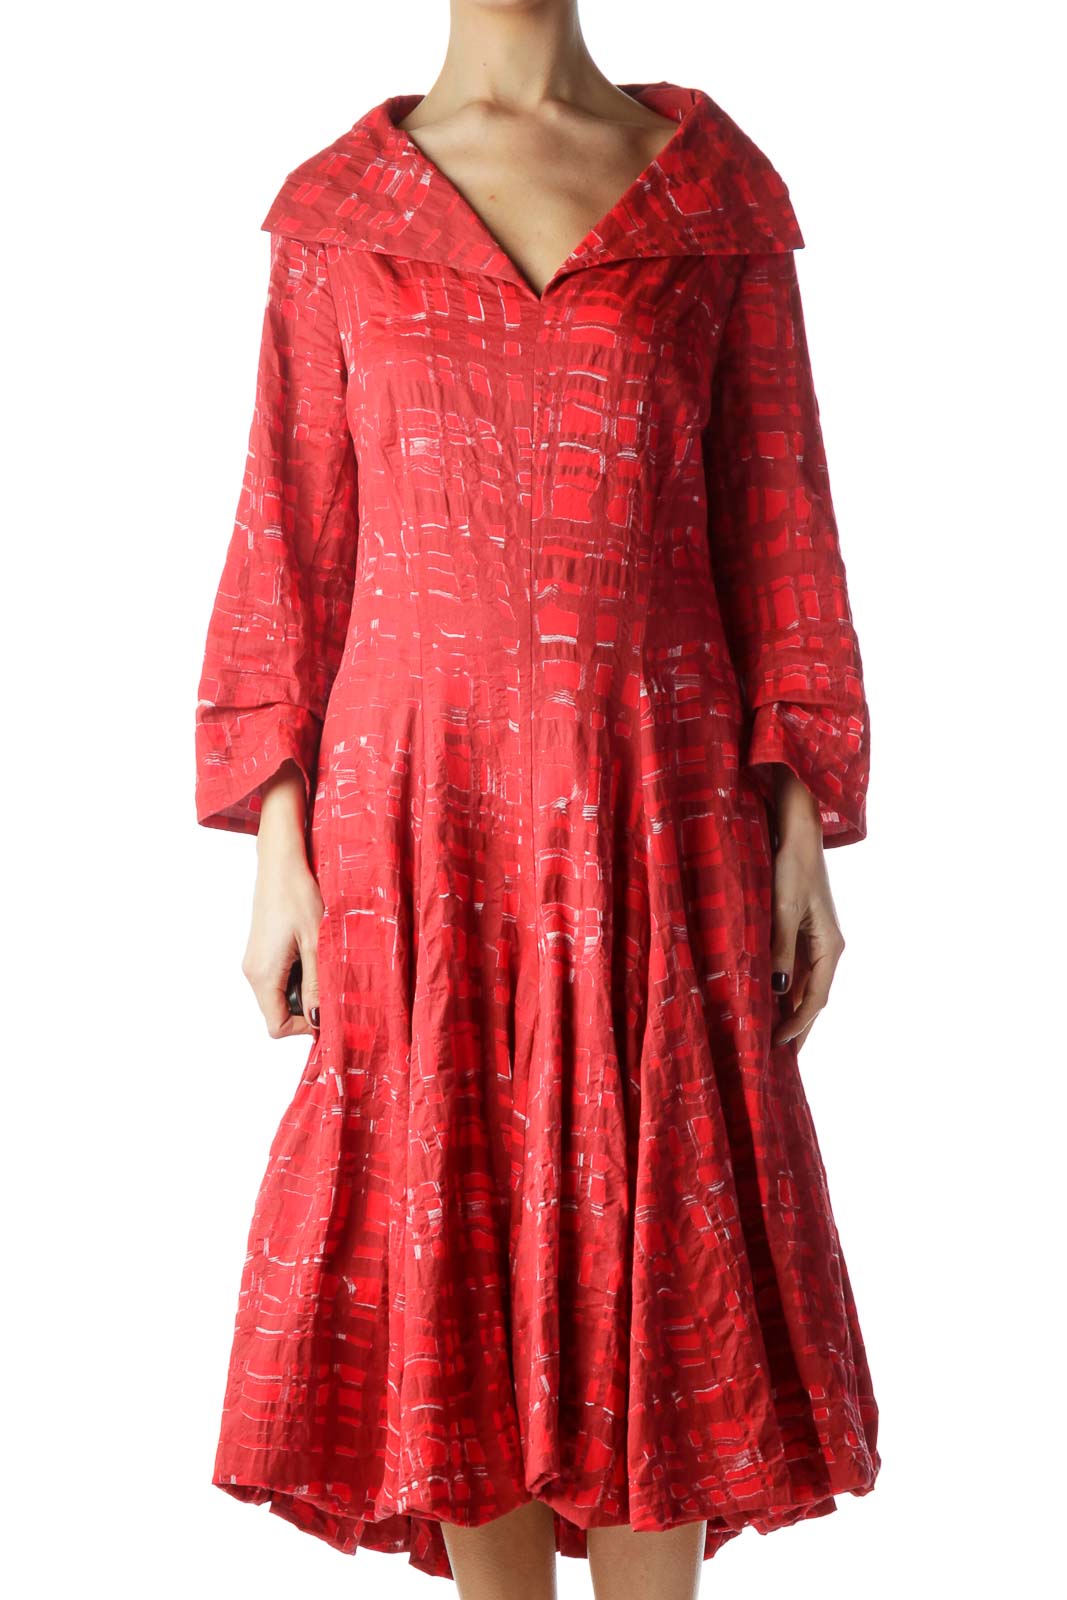 Red Printed Collared Long Sleeve Dress Front